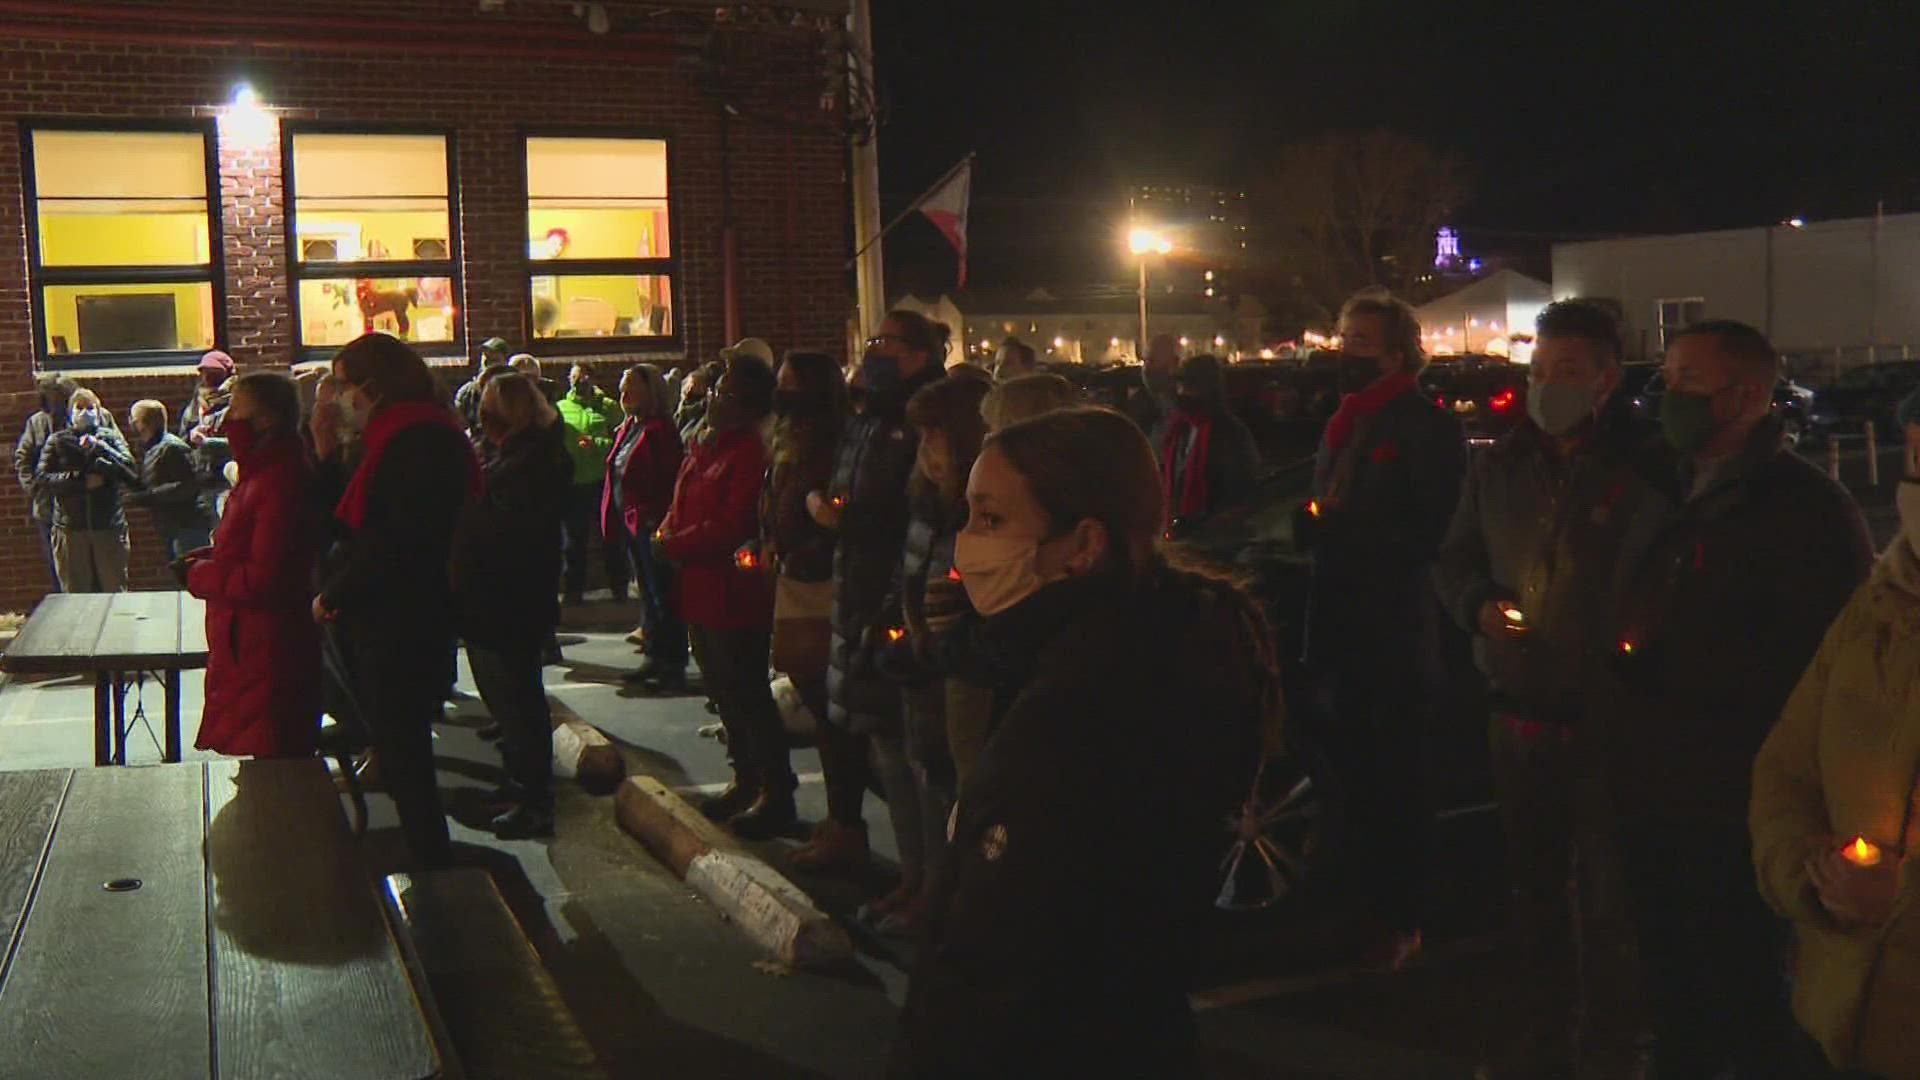 The vigil was put on by The Franny Peabody Center, who offers comprehensive services to those living with HIV.